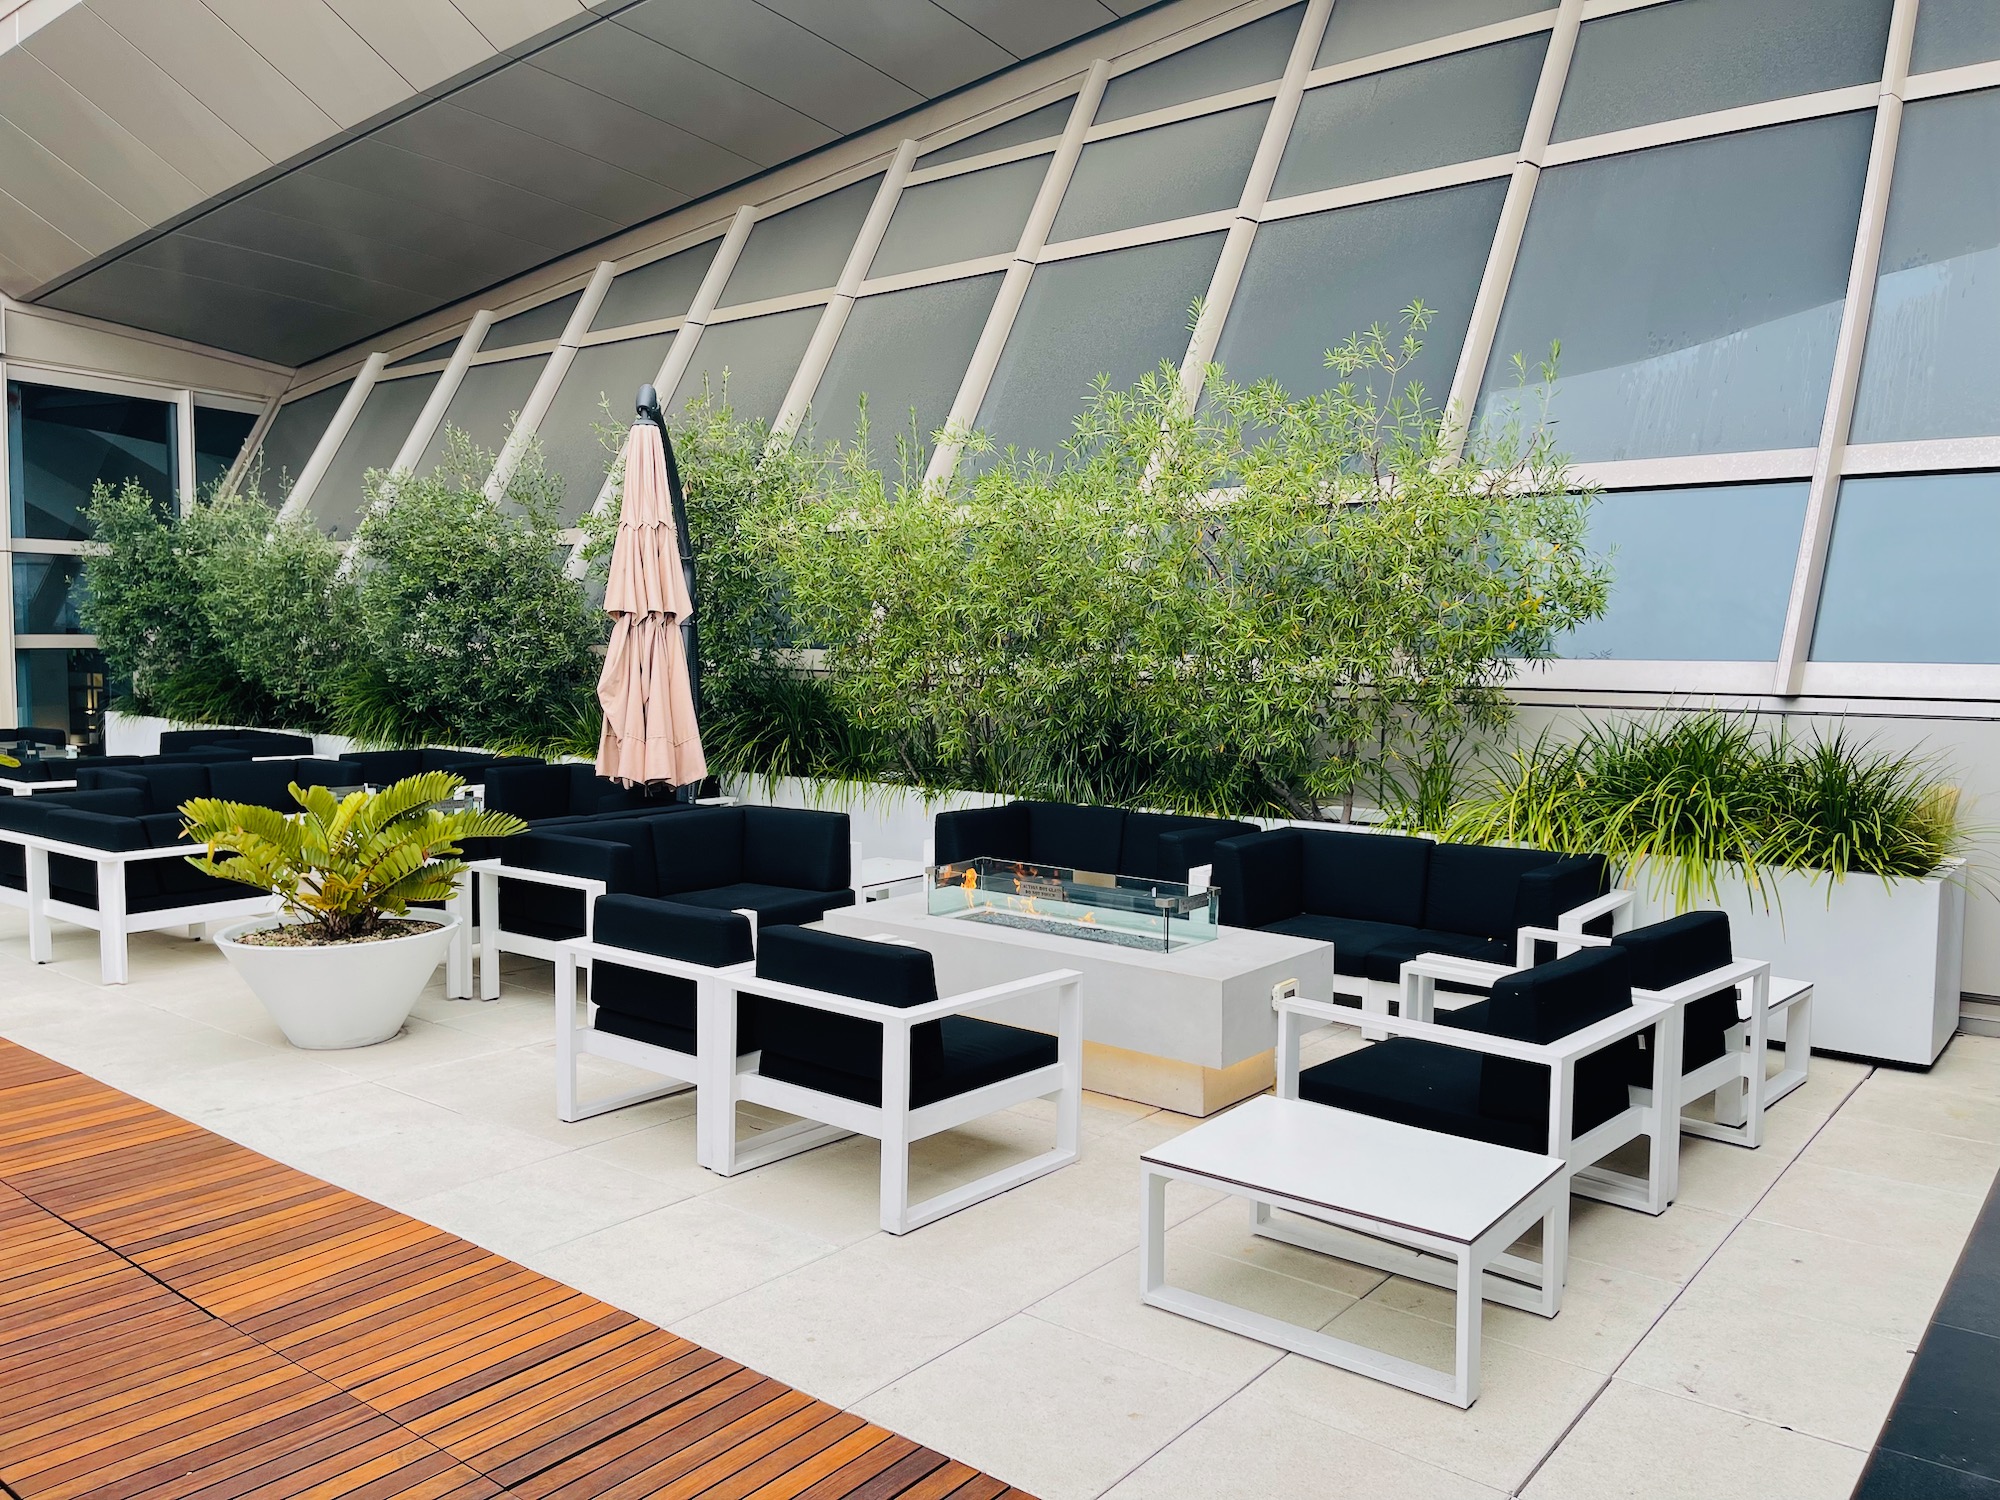 LAX Star Alliance Lounge Reopened